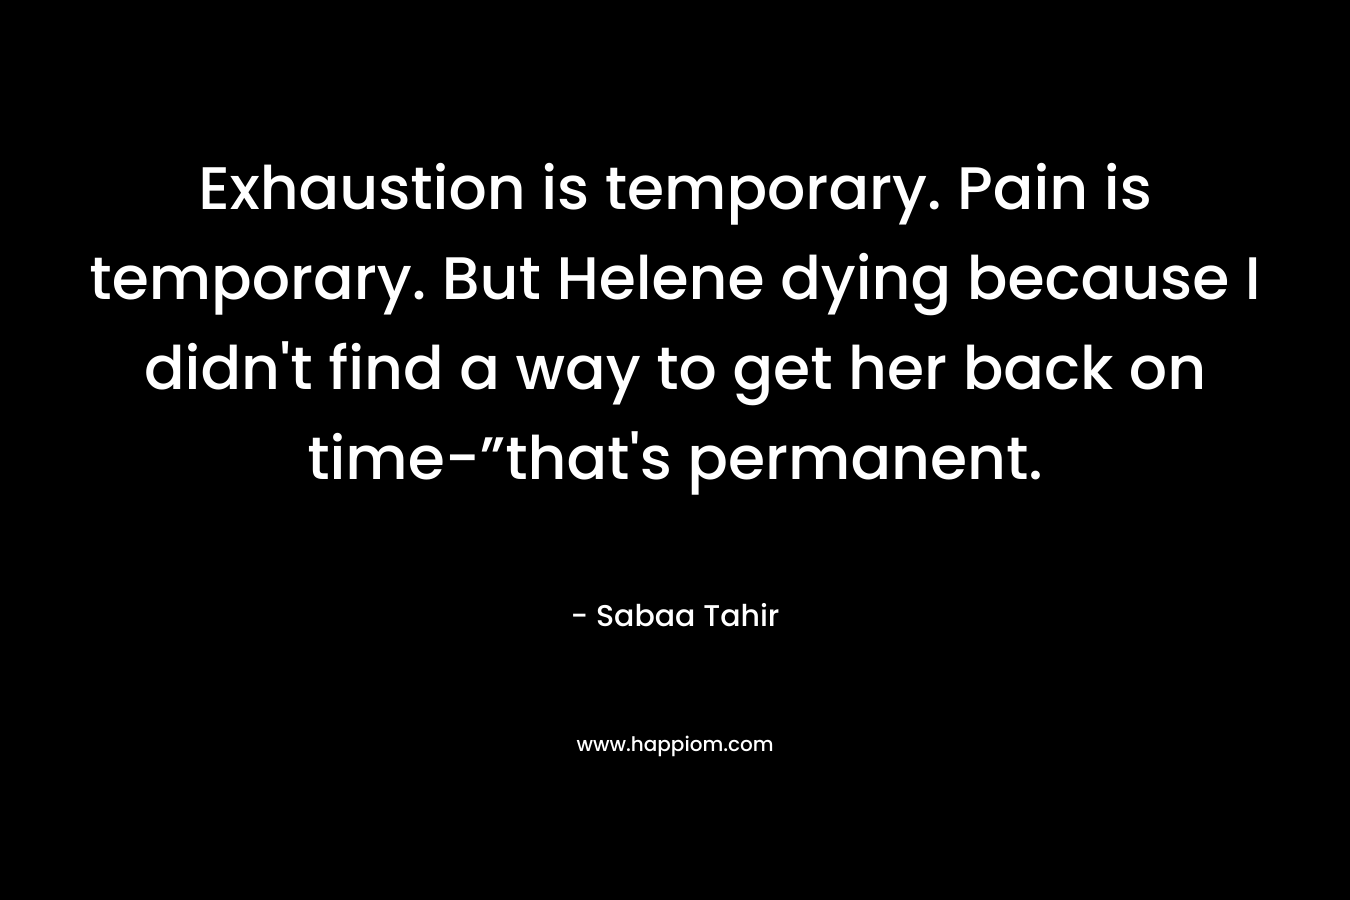 Exhaustion is temporary. Pain is temporary. But Helene dying because I didn't find a way to get her back on time-”that's permanent.